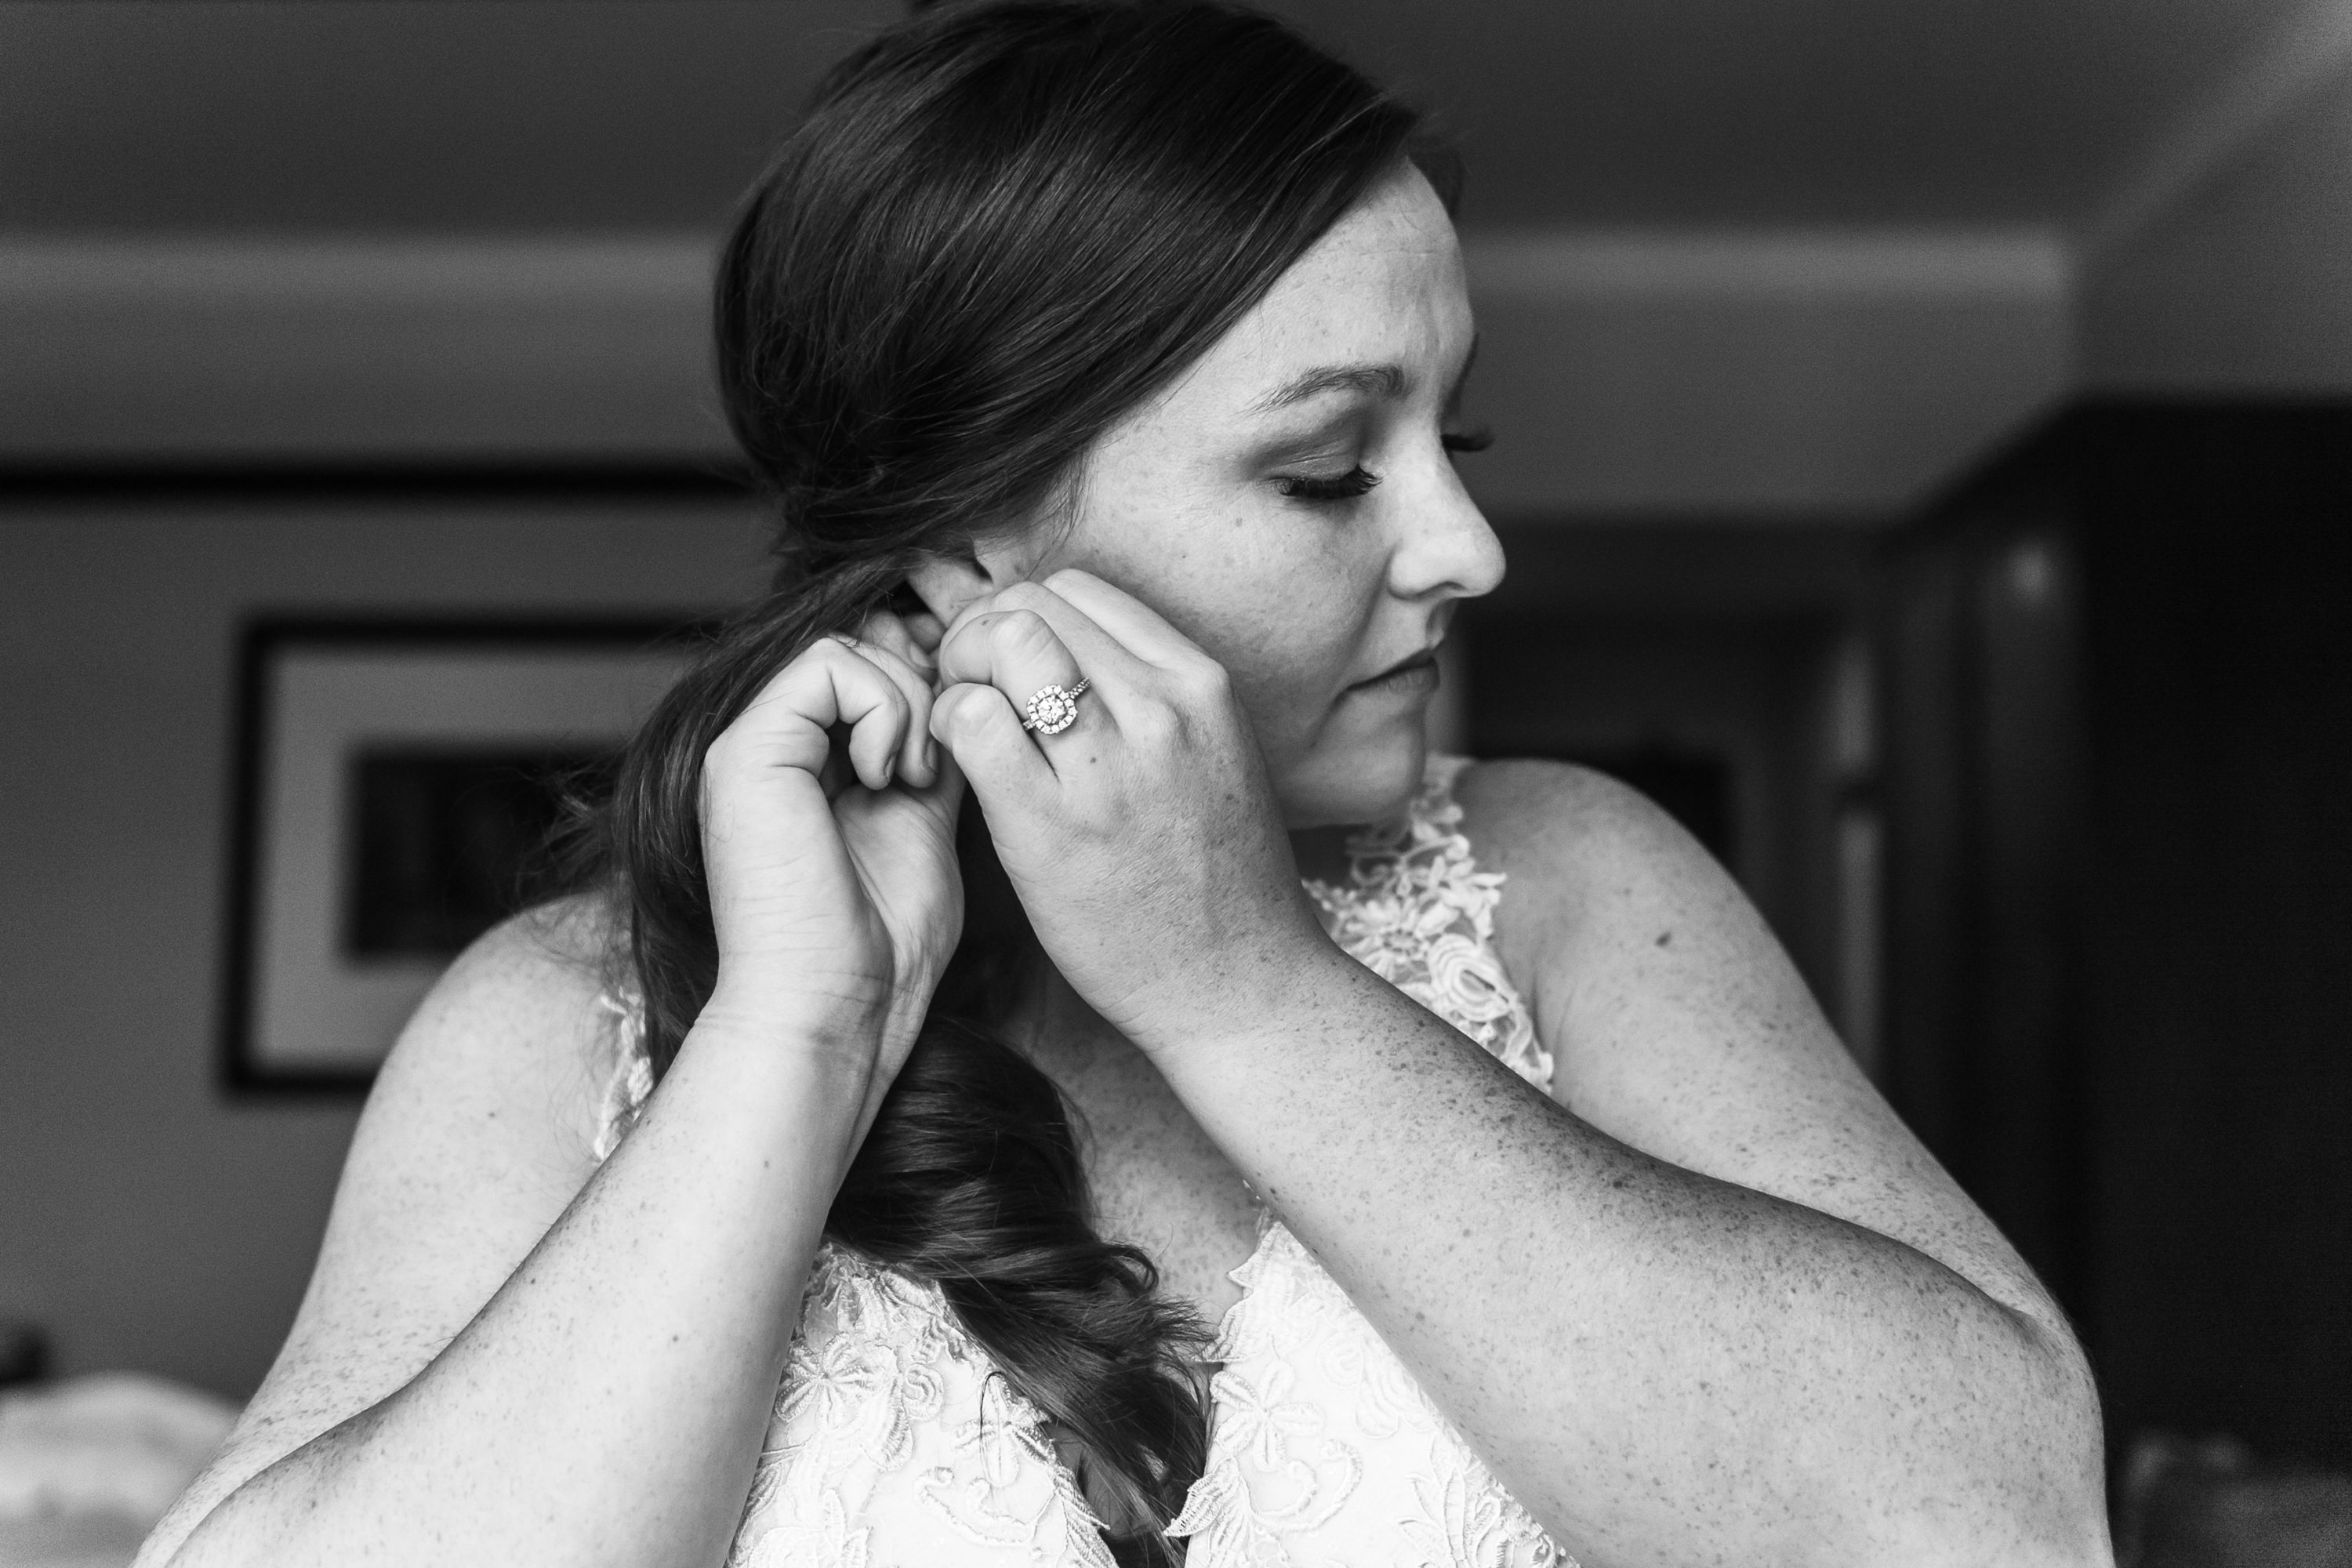 The bride puts on earrings before her wedding at the Greenbriar Inn in Boulder, Colorado.